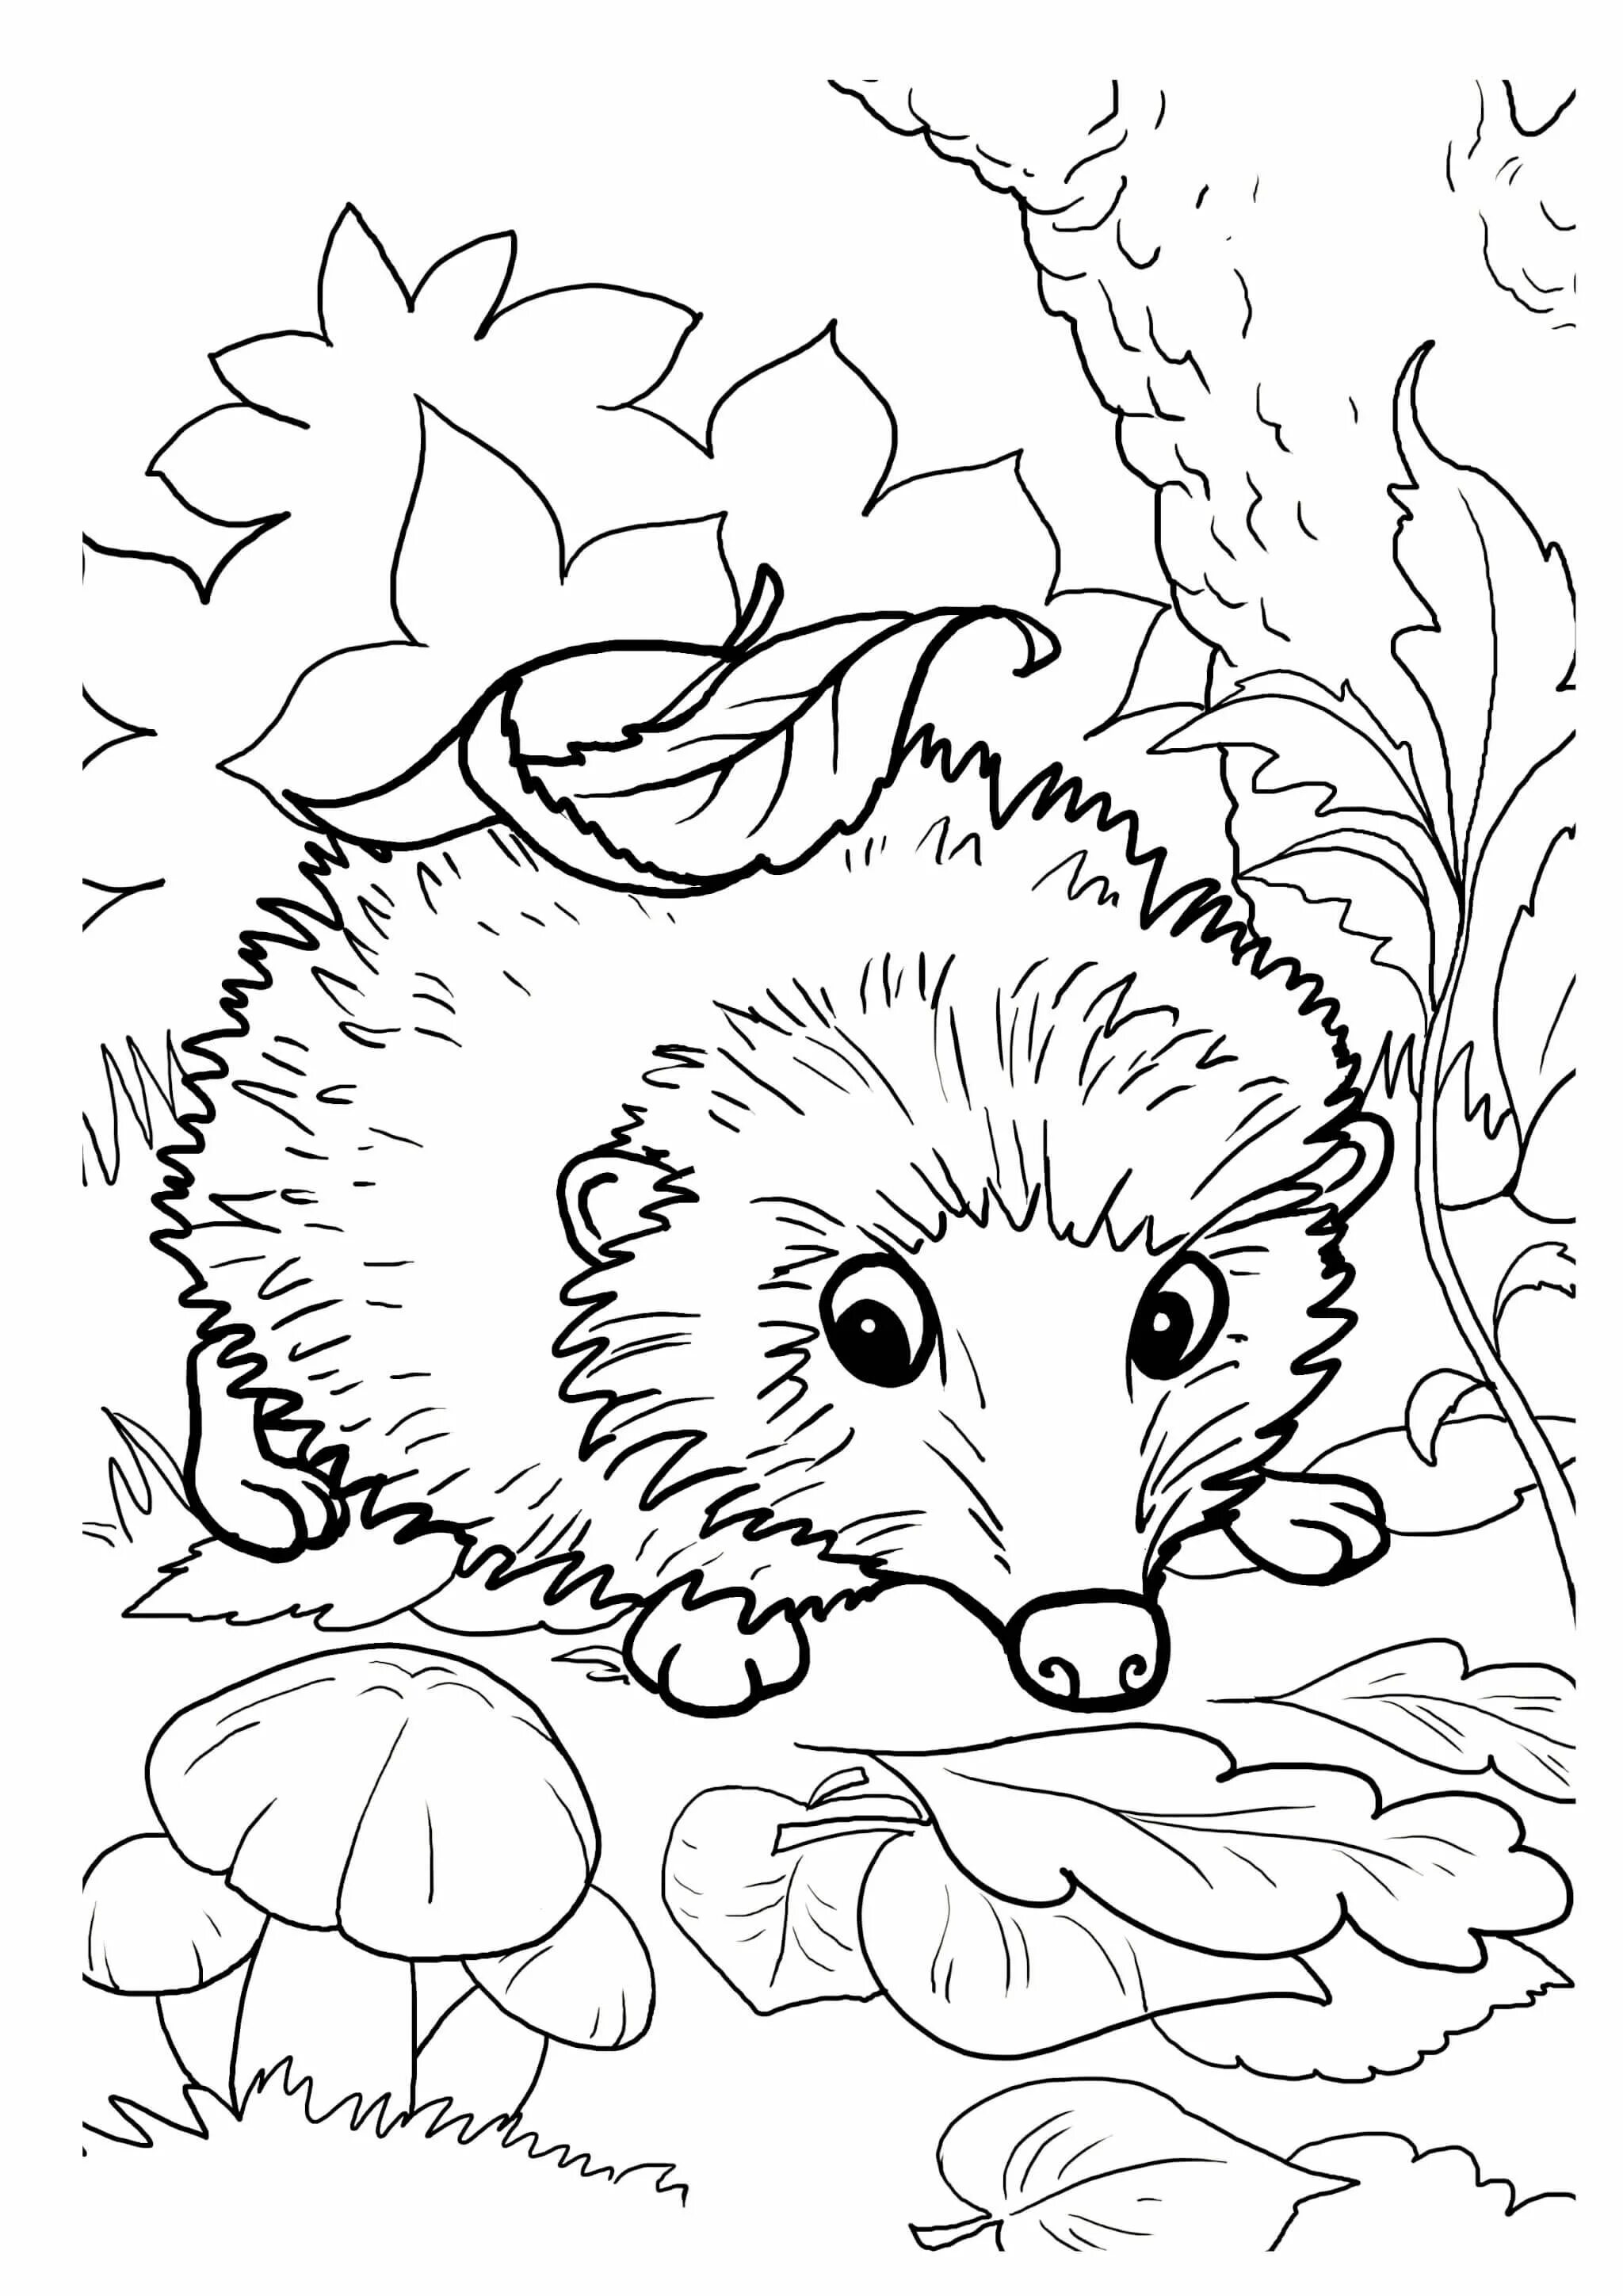 Hedgehog in the forest #2